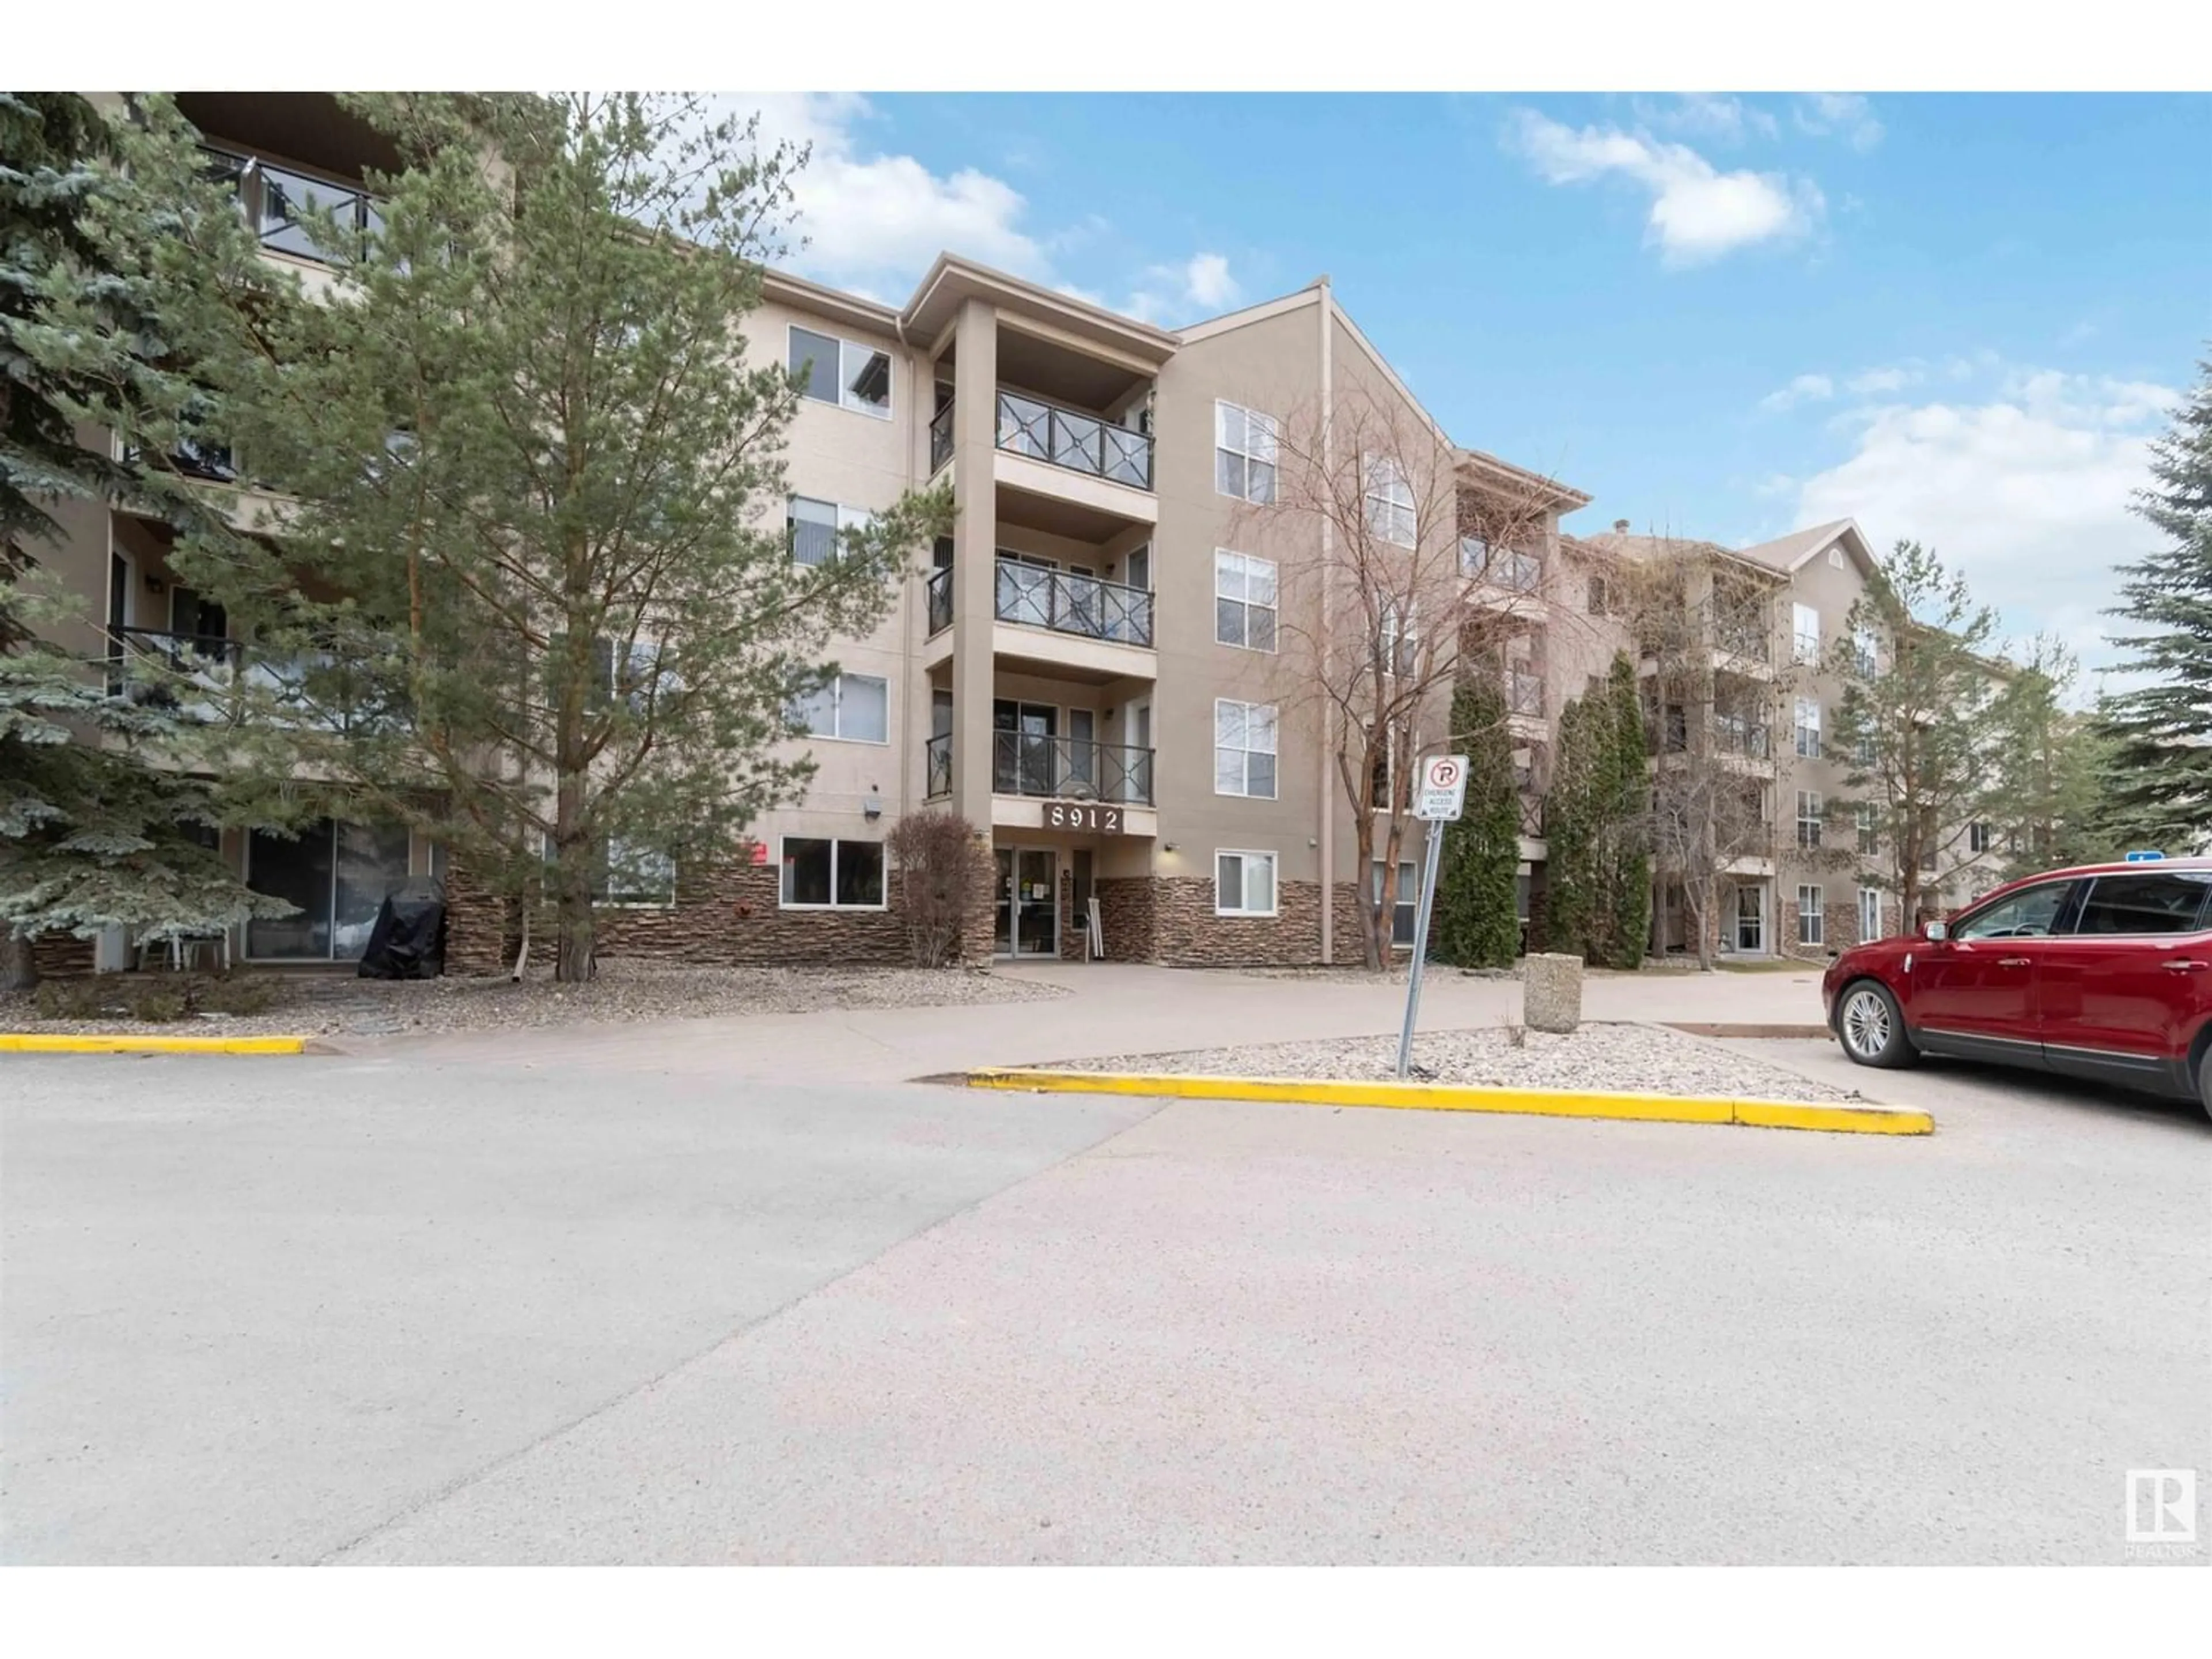 A pic from exterior of the house or condo for #410 8912 156 ST NW, Edmonton Alberta T5R5Z2